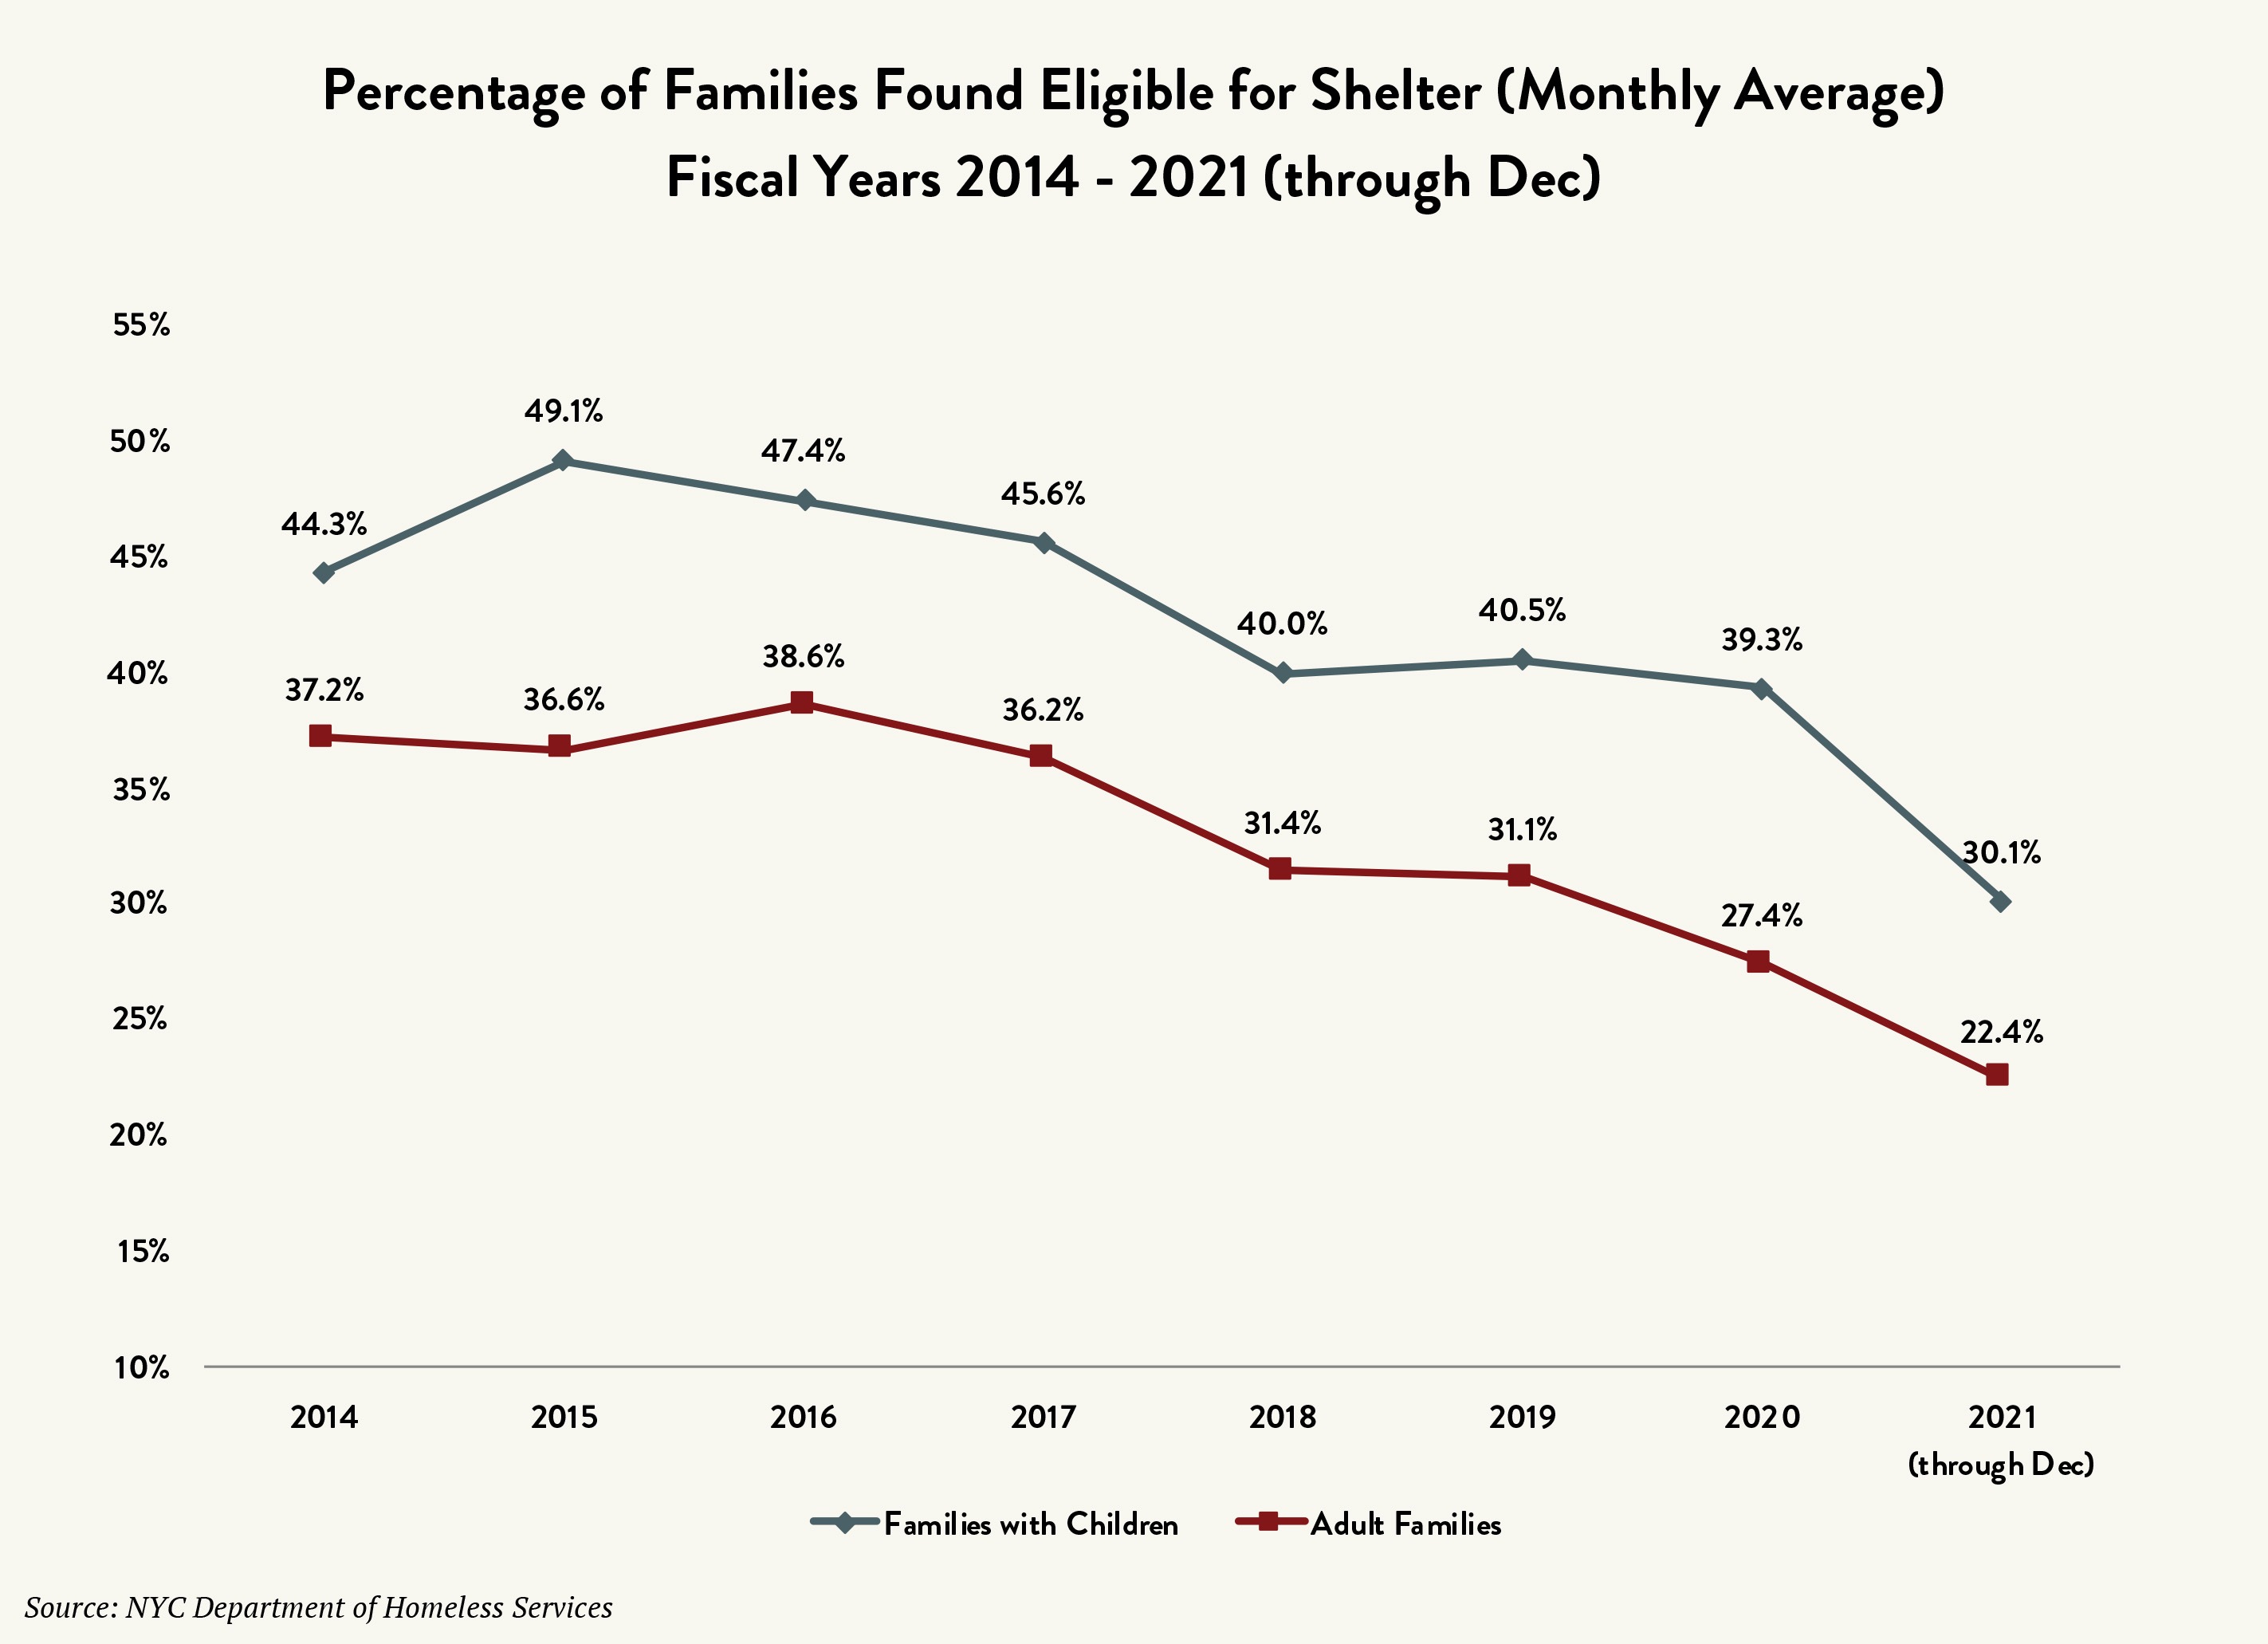 A graph labeled “Percentage of Families Found Eligible for Shelter (Monthly Average) Fiscal Years 2014-2021 (through December).” The vertical axis lists percentages from 10% to 55% in increments of 5. The horizontal axis lists the years 2014 through 2021 (through December). Two lines mark percentages for each year in two categories: A red line shows percentages for adult families with a value of 22.4% for 2021 (through December), and a gray line shows percentages for families with children with a value of 30.1% for 2021 (through December).